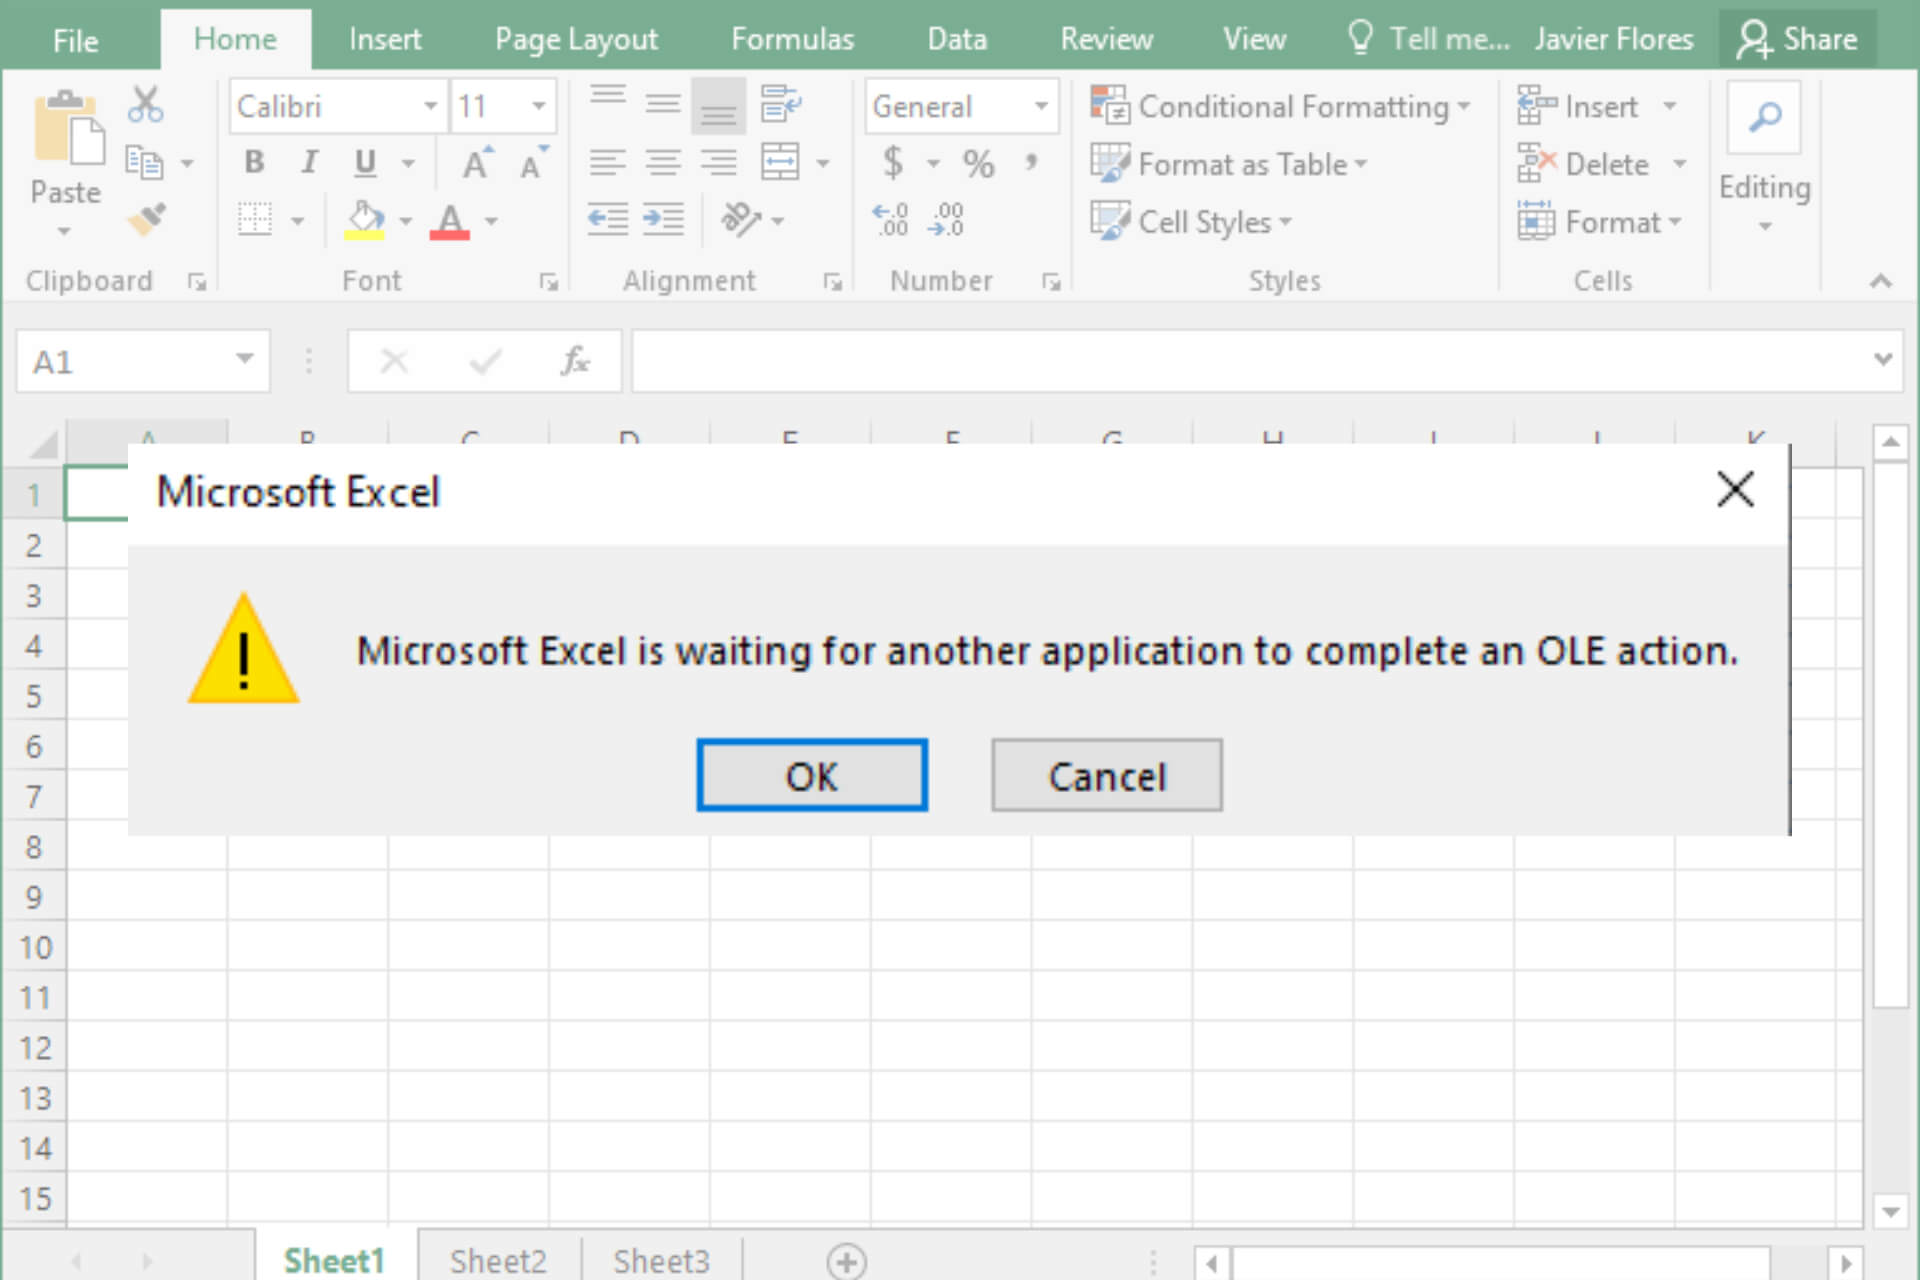 microsoft excel is waiting for another application to complete OLE action